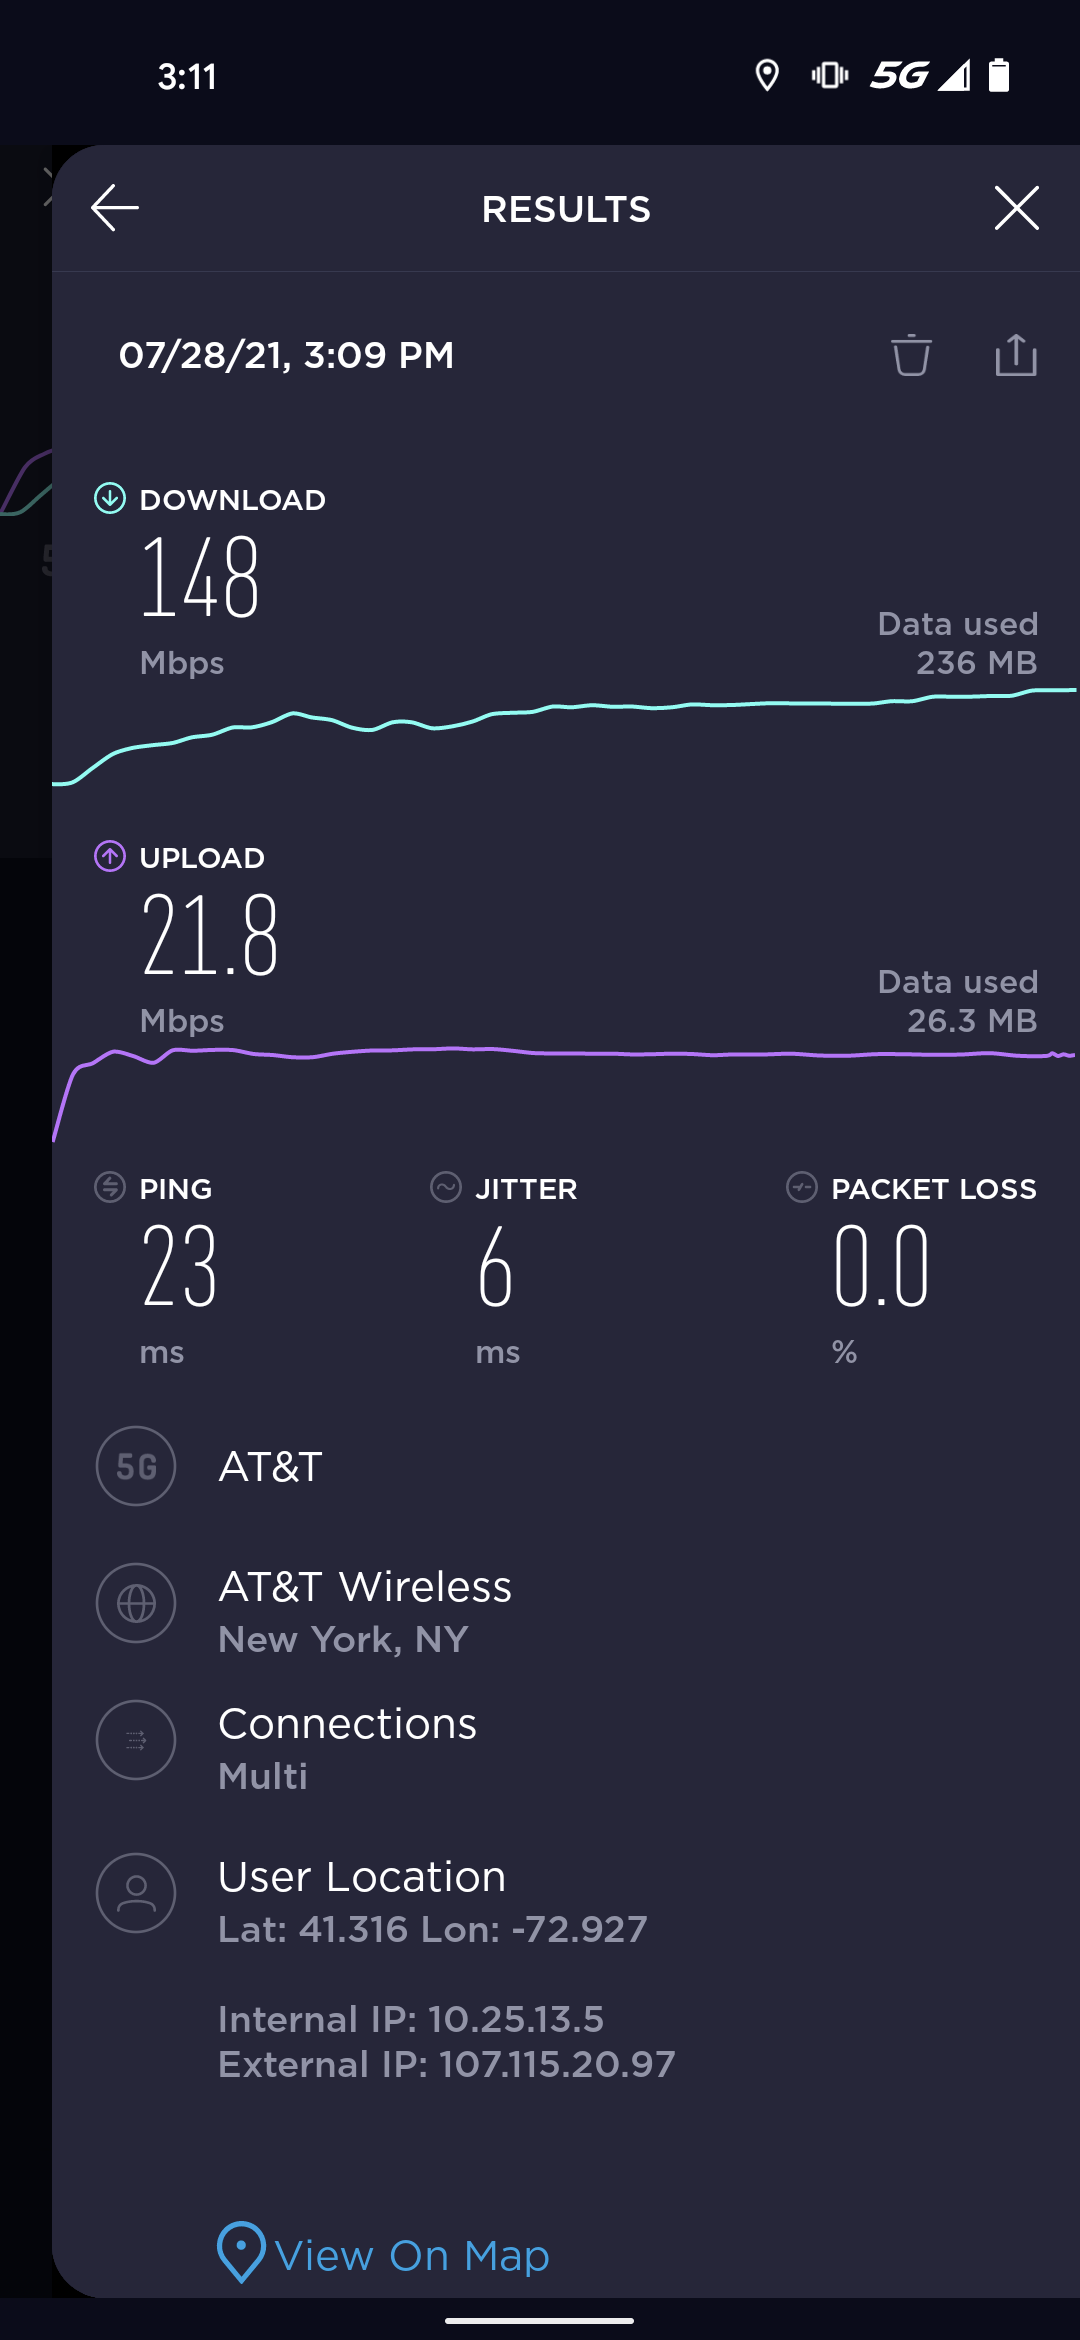 5G downtown speed test results.